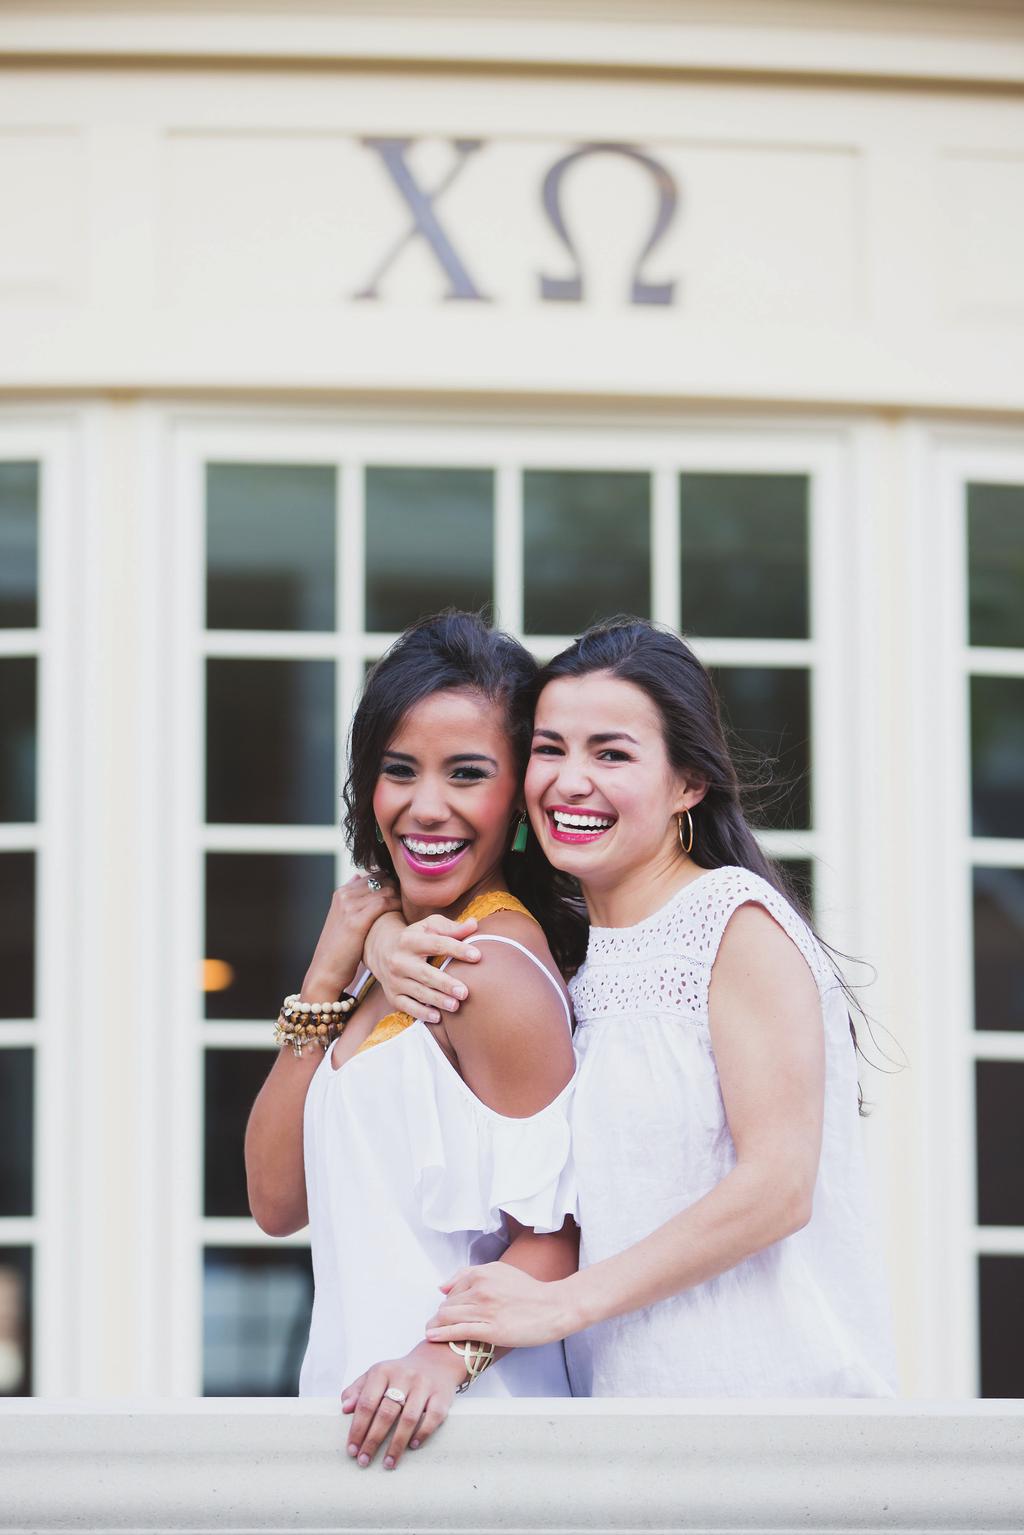 SUMMARY OF EXPECTATIONS FOR CHI OMEGA INITIATION Before initiation into Chi Omega, your daughter must complete the following requirements: Complete the New Member Program: Attend the new member